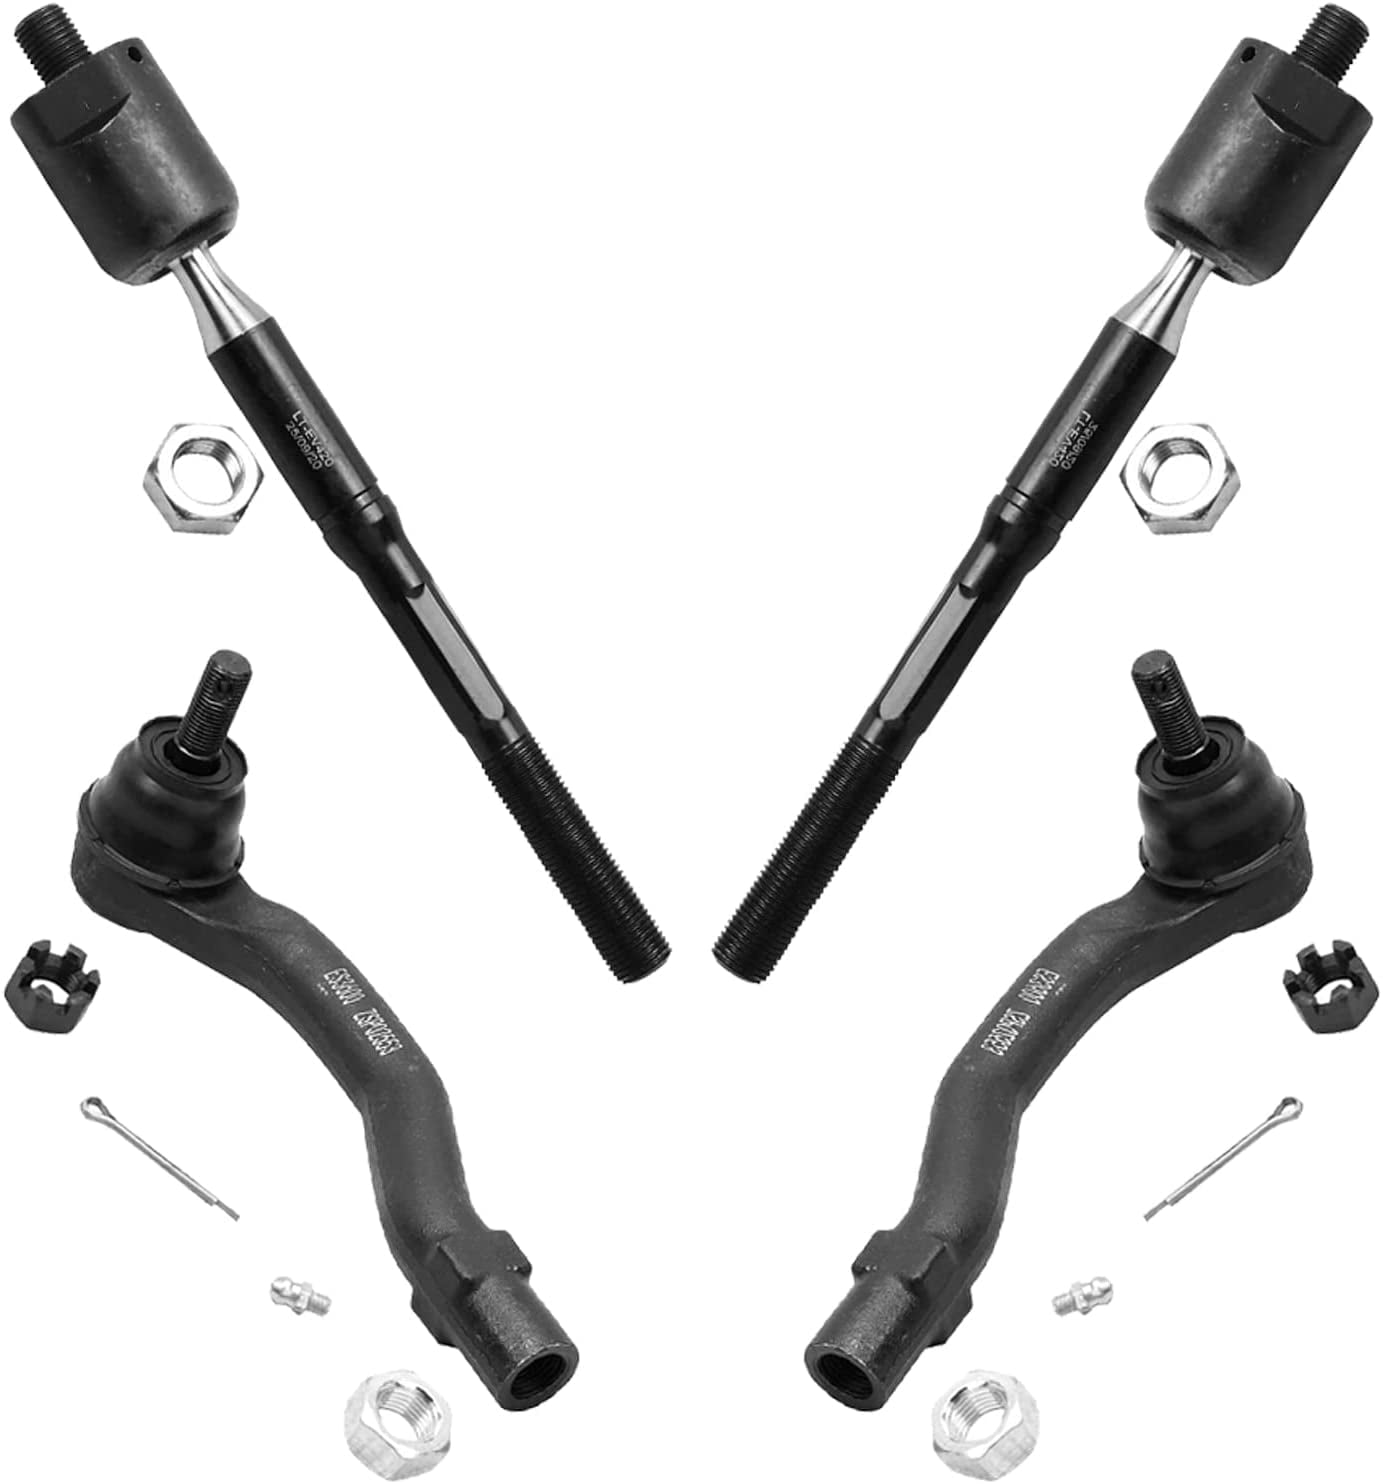 Detroit Axle All (4) Front Inner  Outer Tie Rod End Links Replacement  for 2002-2003 Toyota Camry Lexus ES300 4pc Set